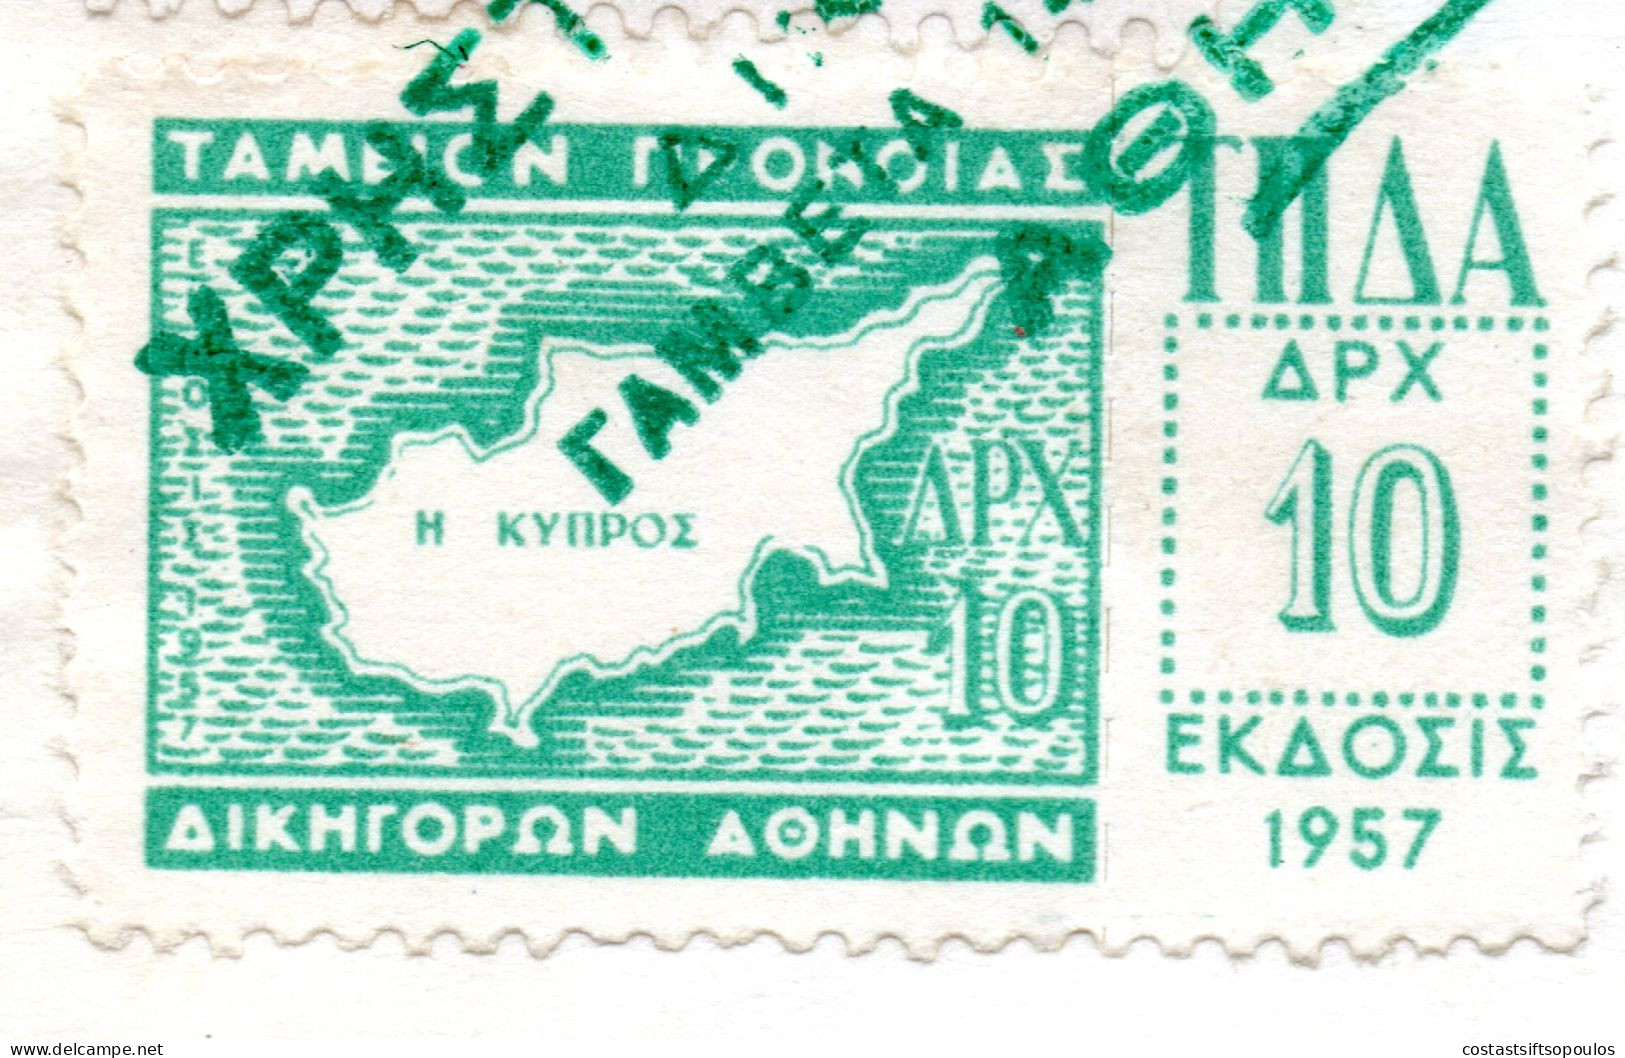 2505. GREECE. 1960 6 PAGES DOCUMENT WITH SCARCE 1957 CYPRUS MAP 10 DR. REVENUE. CROSS FOLDED. WILL BE SHIPPED FOLDED - Fiscali